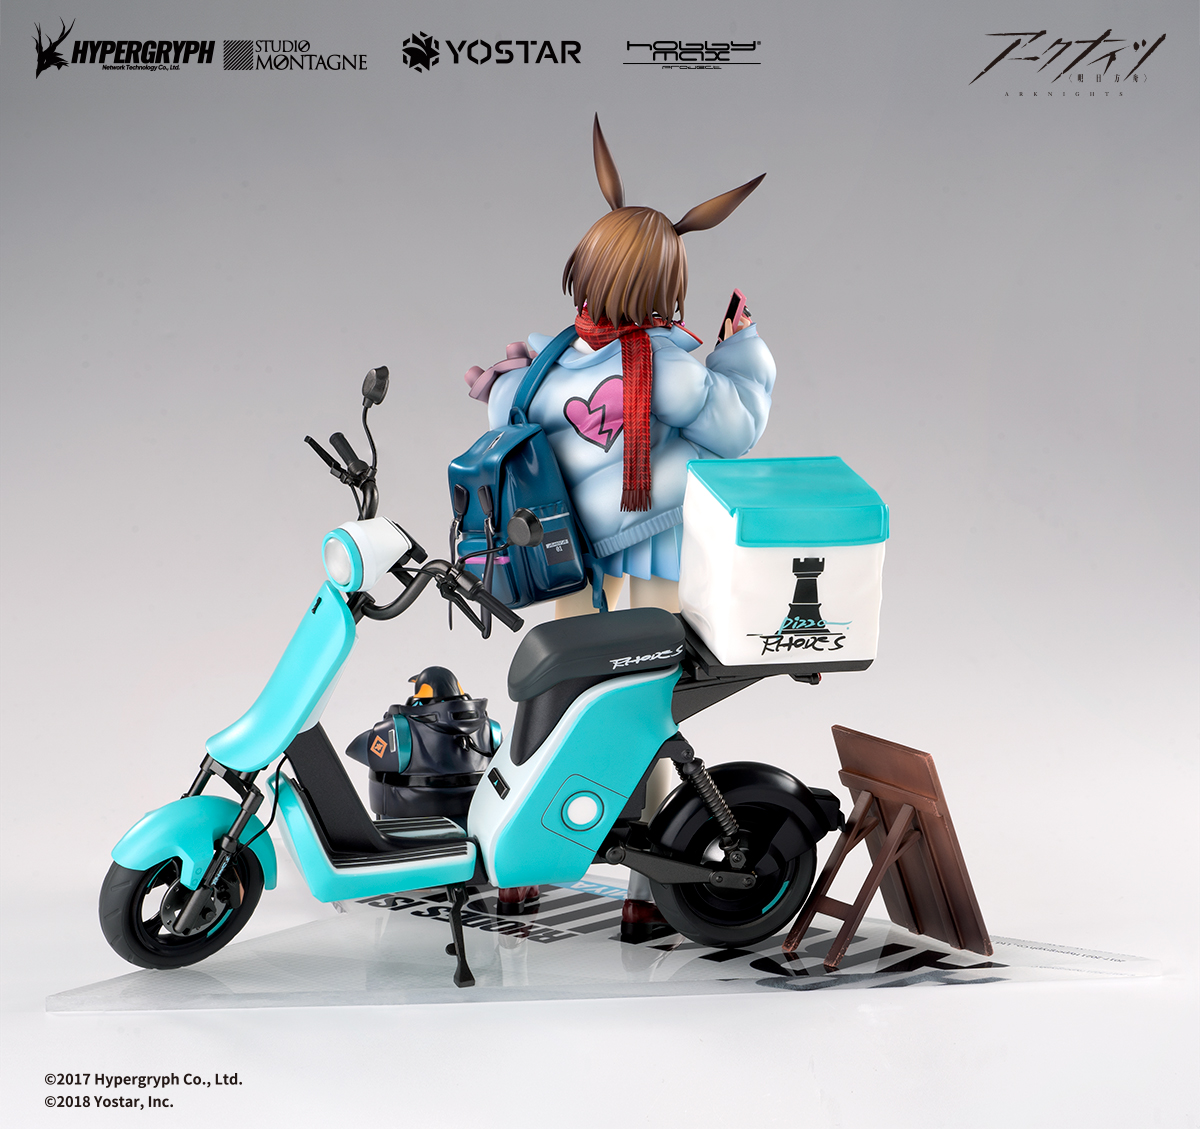 Arknights 1/7 Amiya Apprentice Courier VER. Deluxe Edition